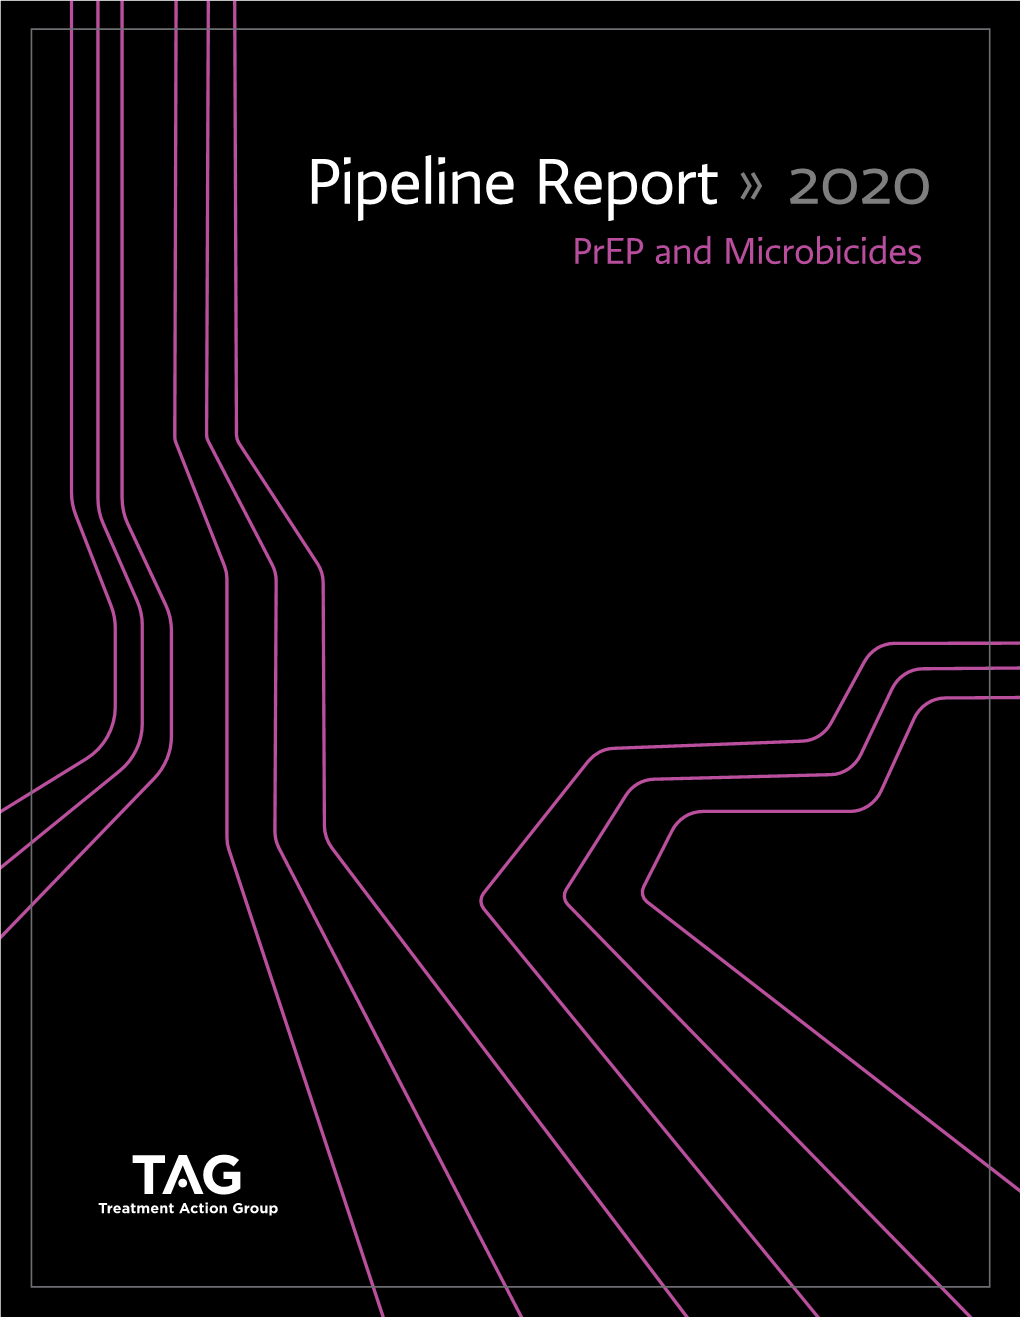 Pipeline Report » 2020 Prep and Microbicides PIPELINE REPORT 2020